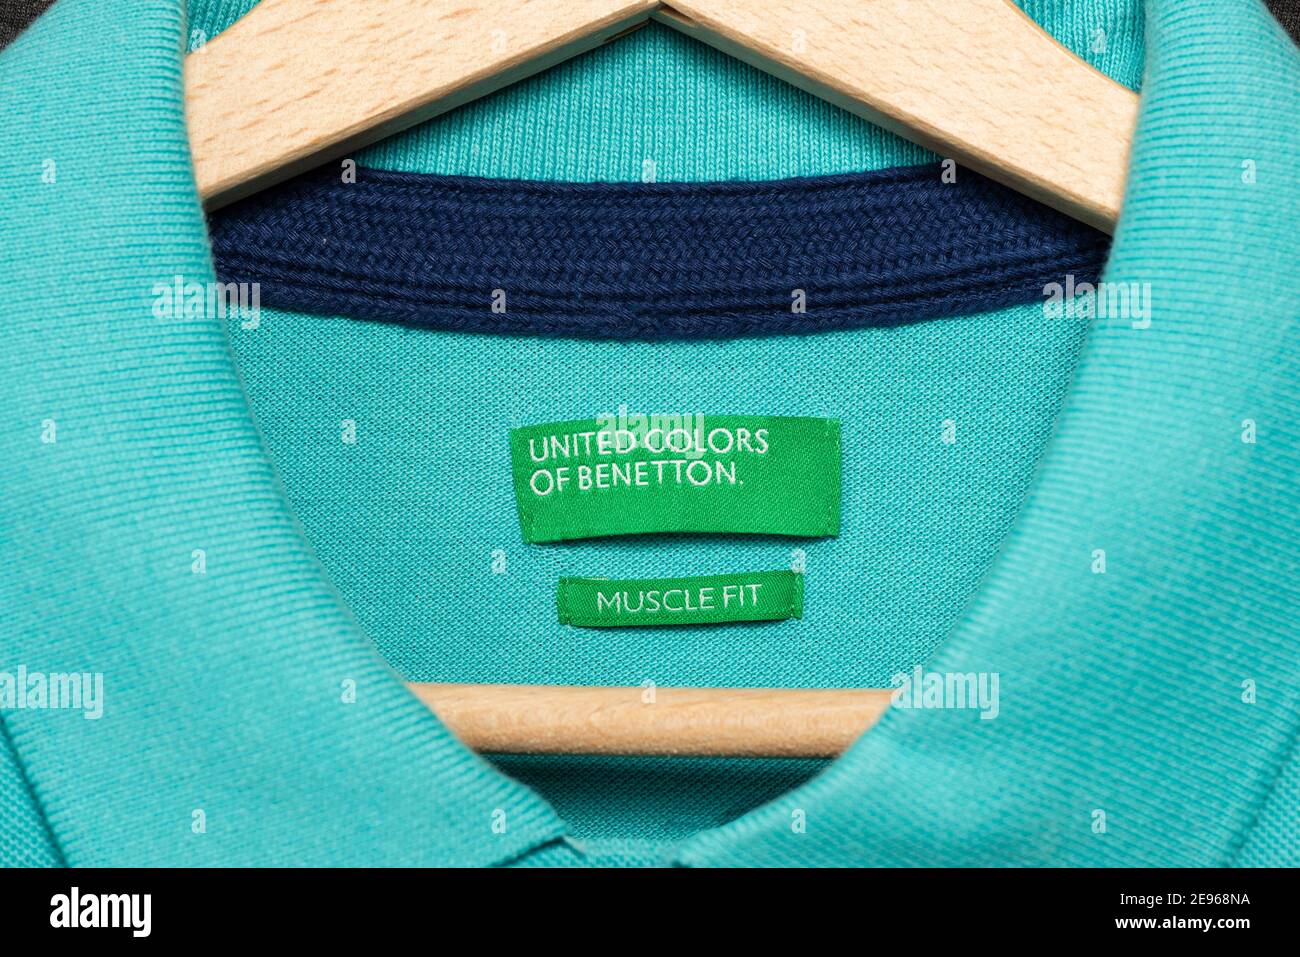 of hanger Colors Muscle tee Fit teal United on wooden Alamy - green Stock Benetton hanging Photo on label shirt